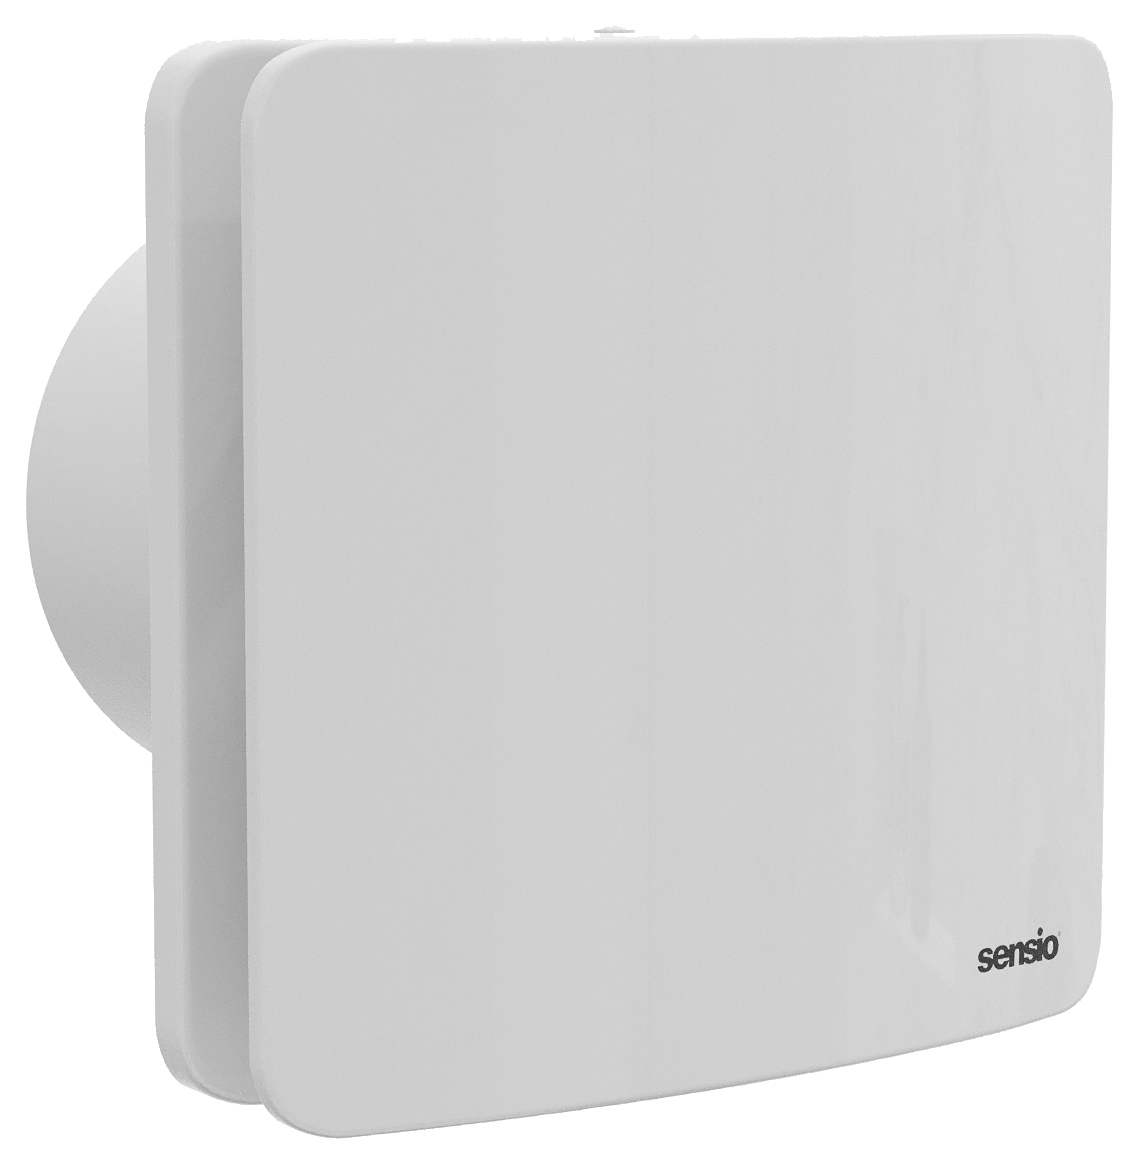 Image of Sensio Rubi White Wall Ventilation Fan with Aquilo Ventilation Ducting Kit - ø100mm